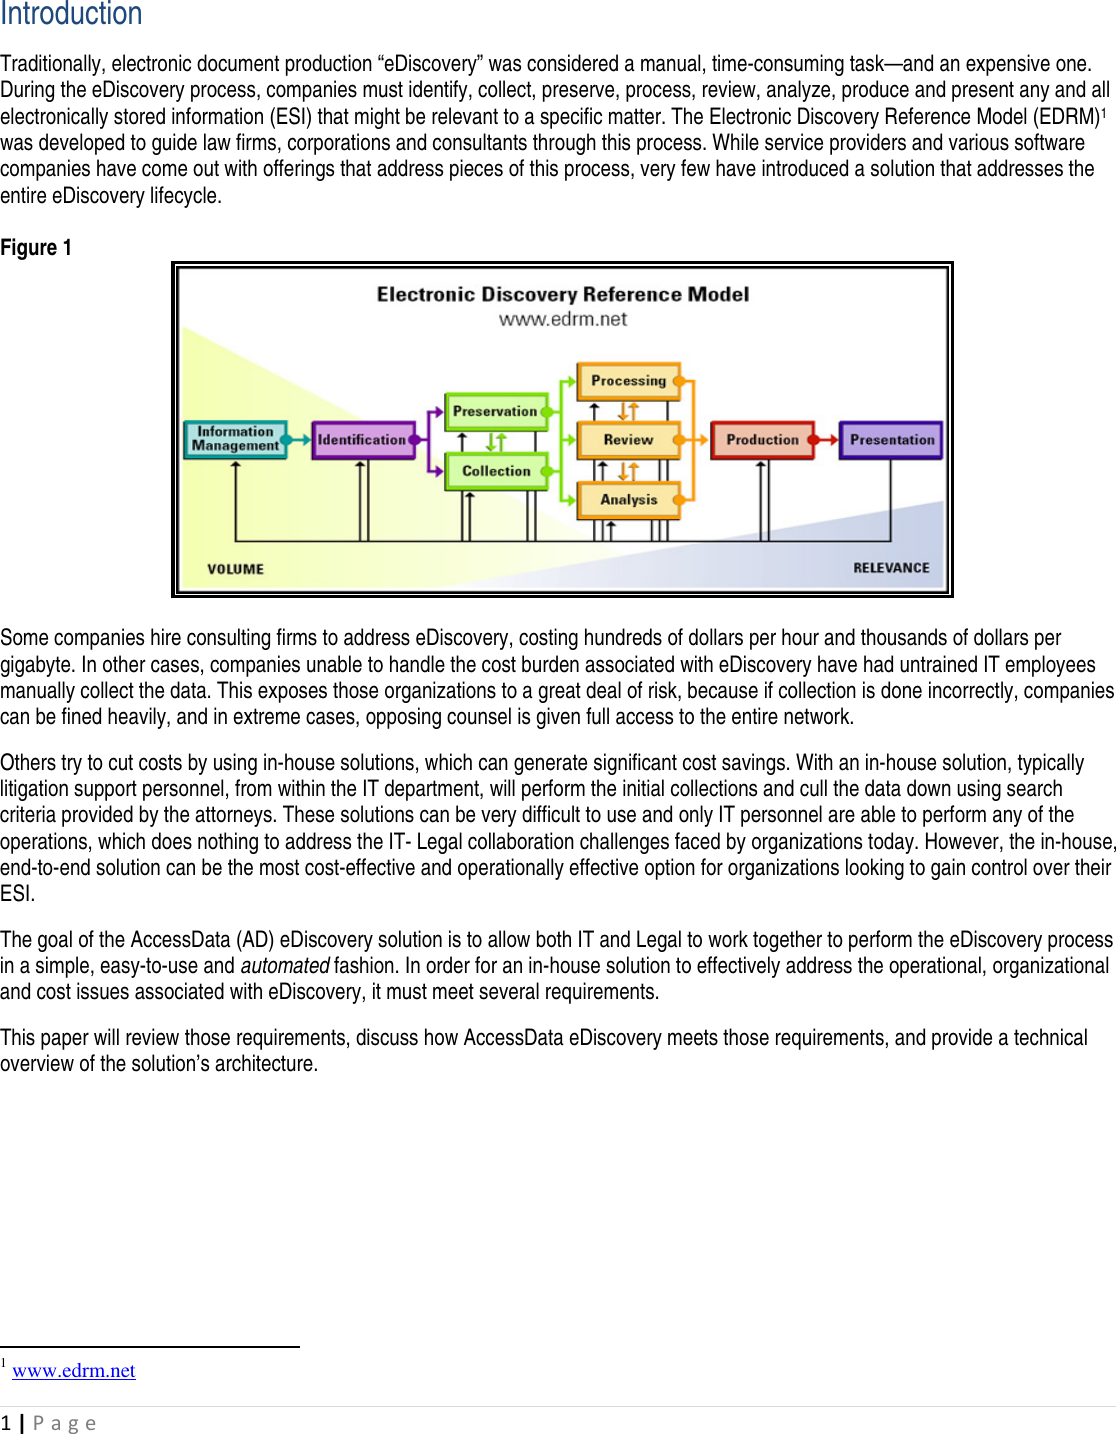 Page 3 of 12 - Guide To AccessData EDiscovery_MapsEDRM_3-4-10[1]  AD E Discovery Implementing In-House Solution Maps EDRM